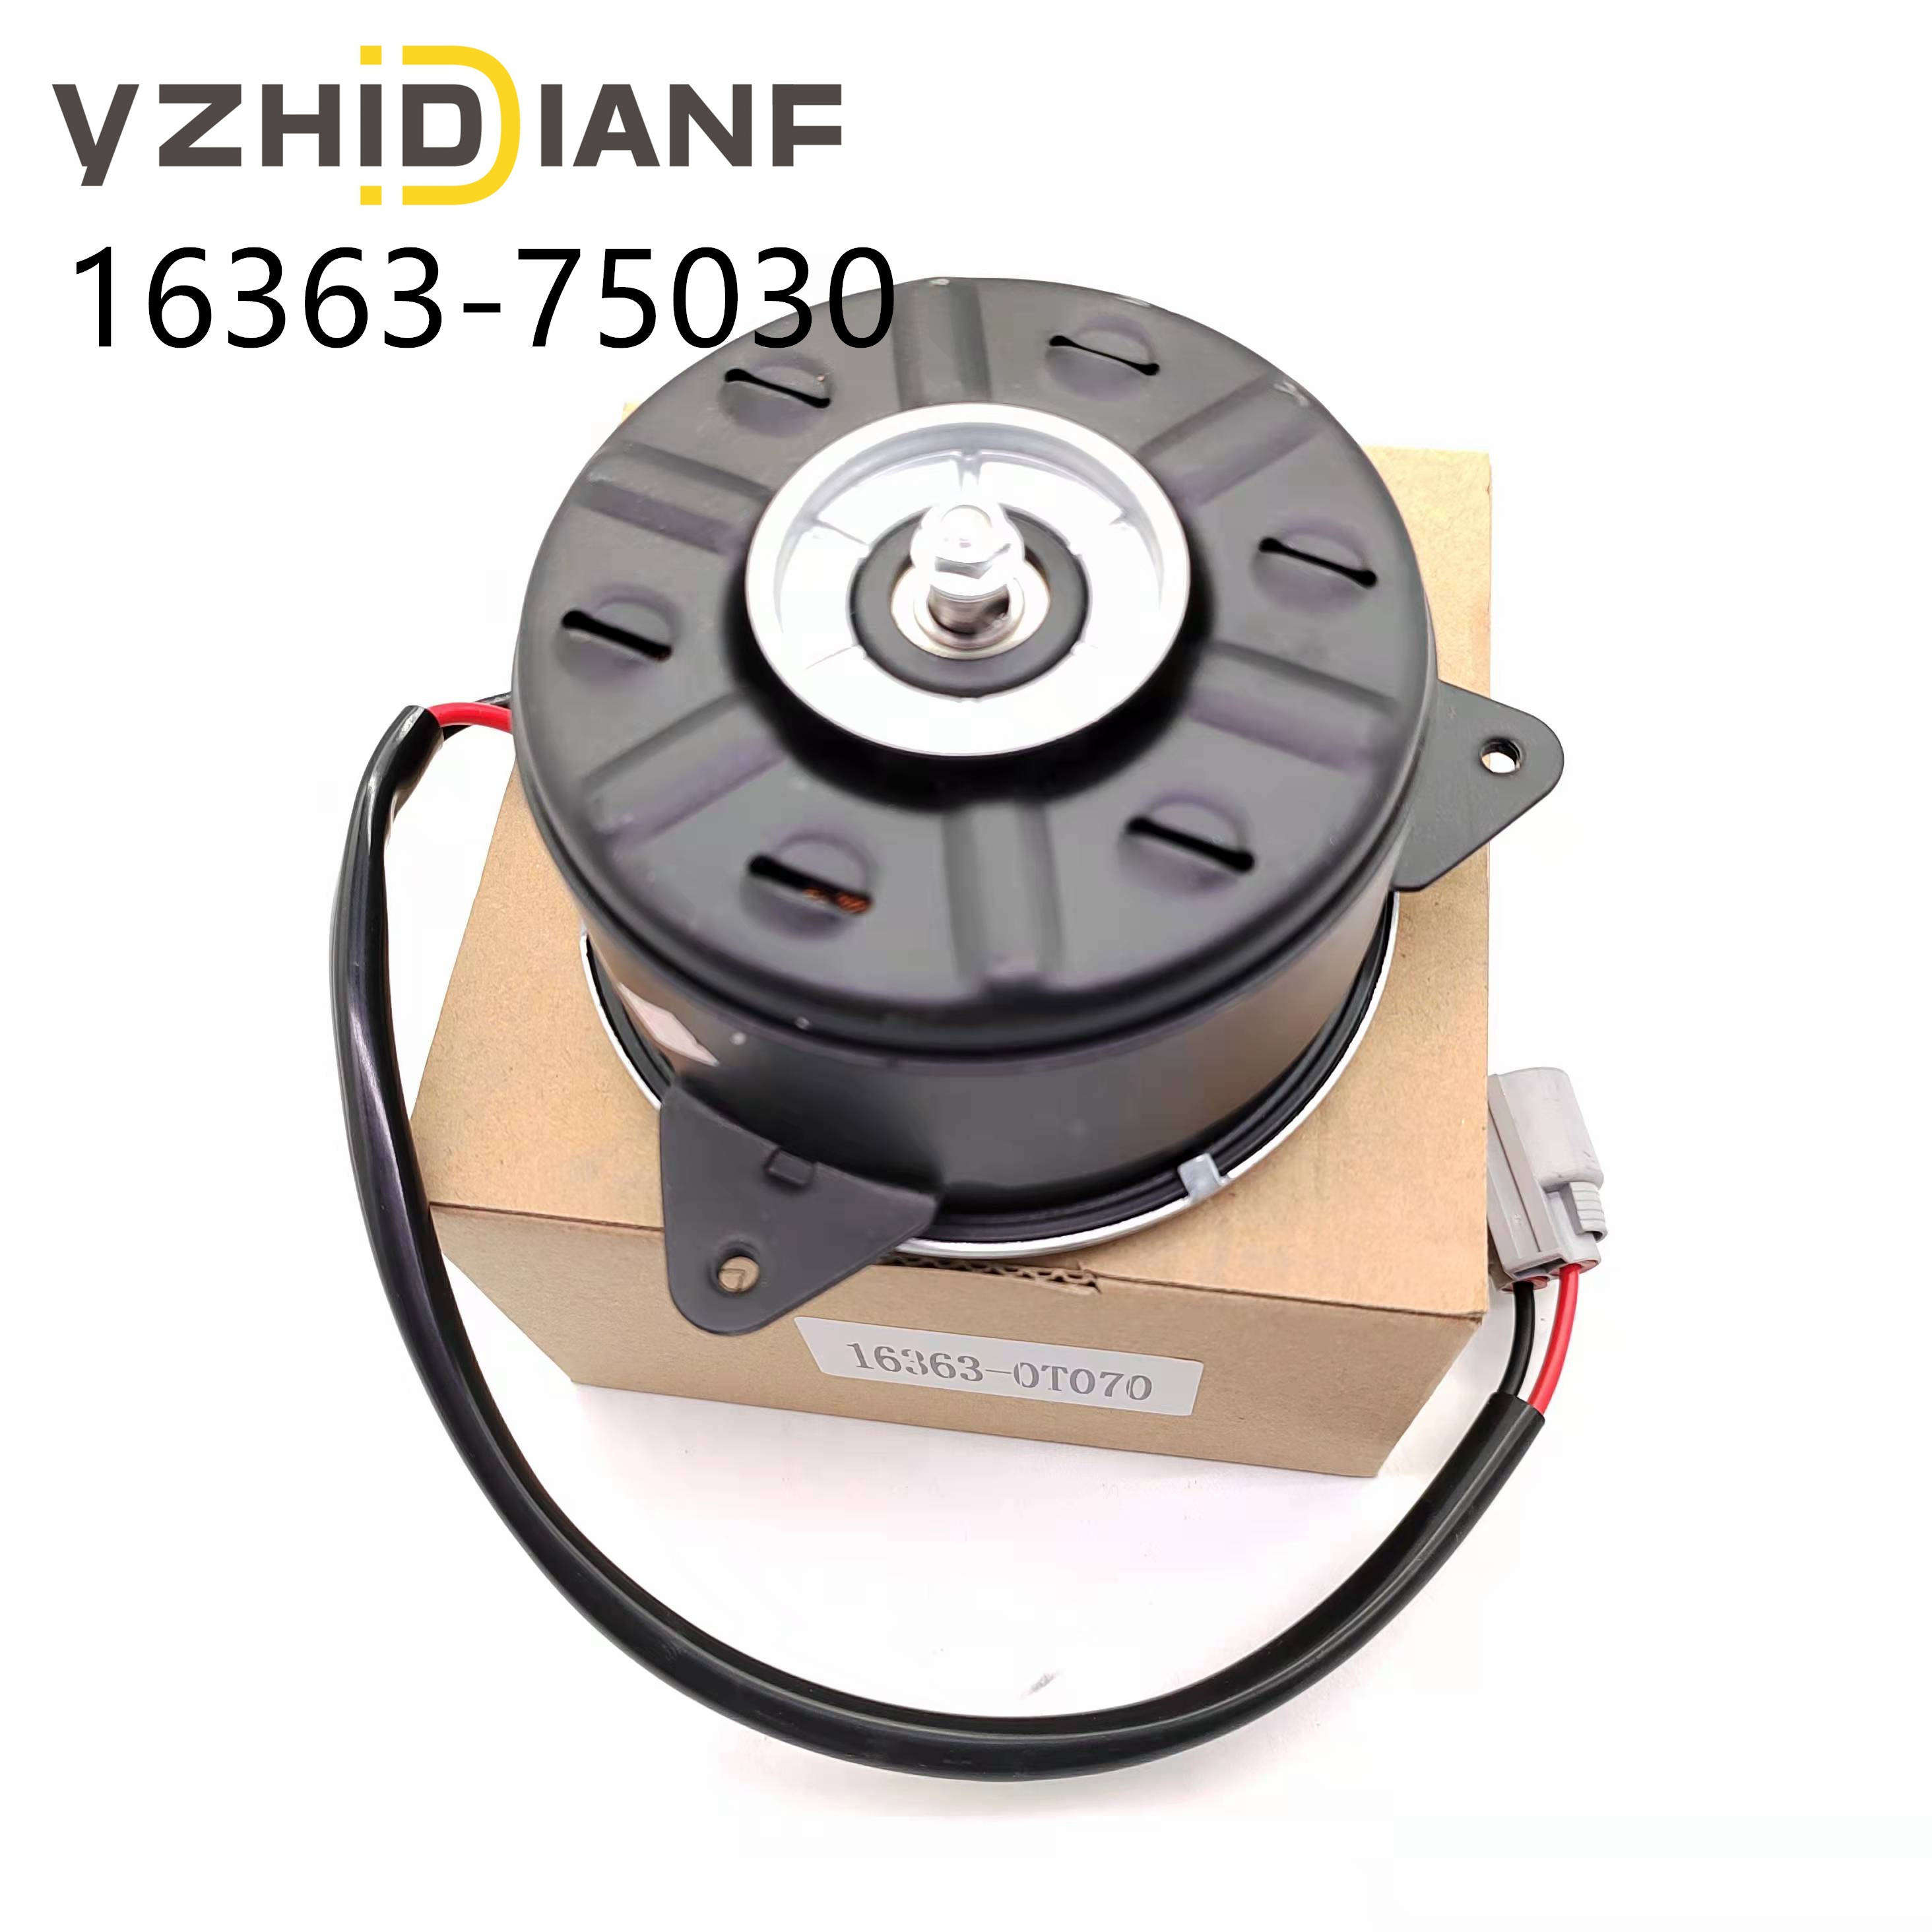 Factory Direct Auto Engine Cooling System Radiator Fan Motor 16363-75030 168000-4812 For Lexus Rx350 Rx450H 3.5L